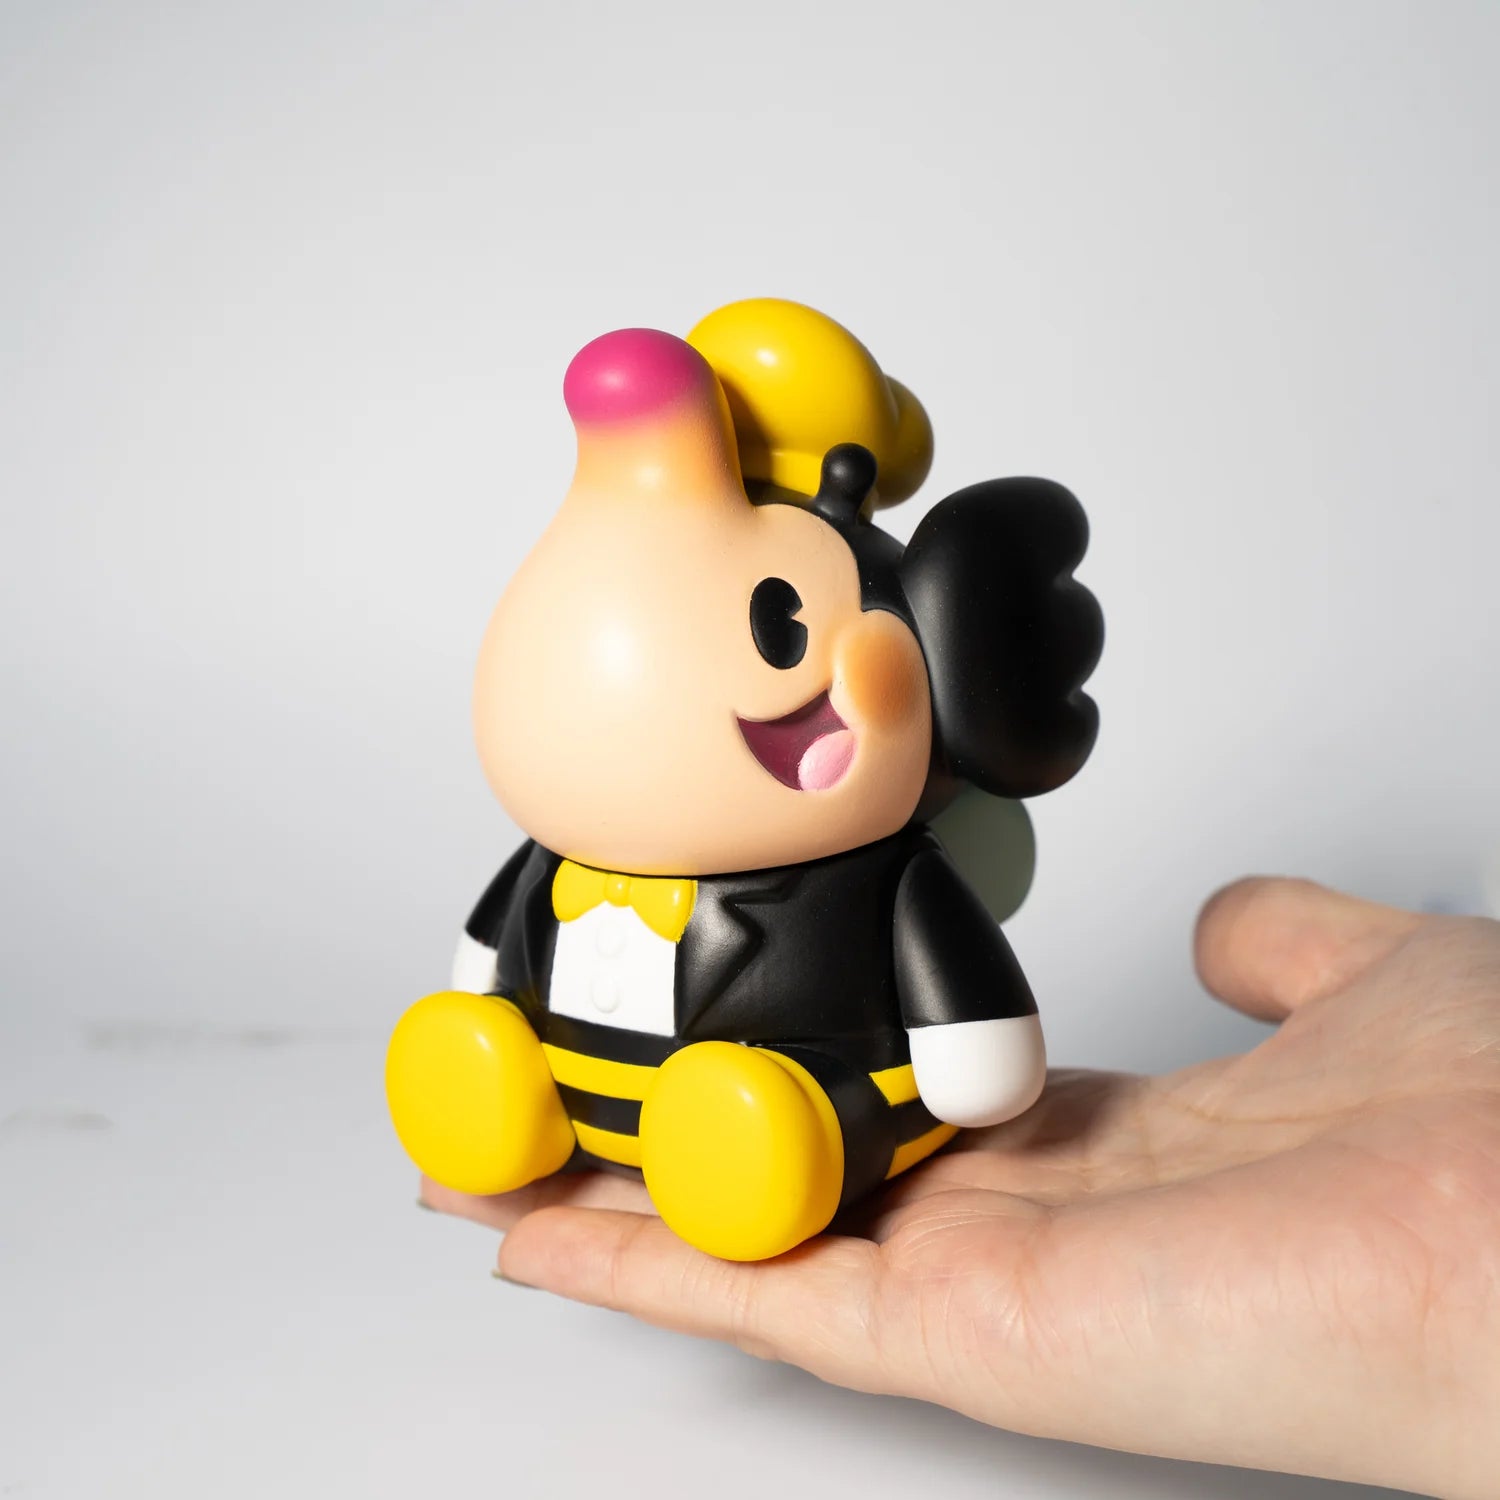 A hand holding the BUMBLE BEE ELFIE by Too Natthapong, a 3-inch soft vinyl toy from the Elfie series.